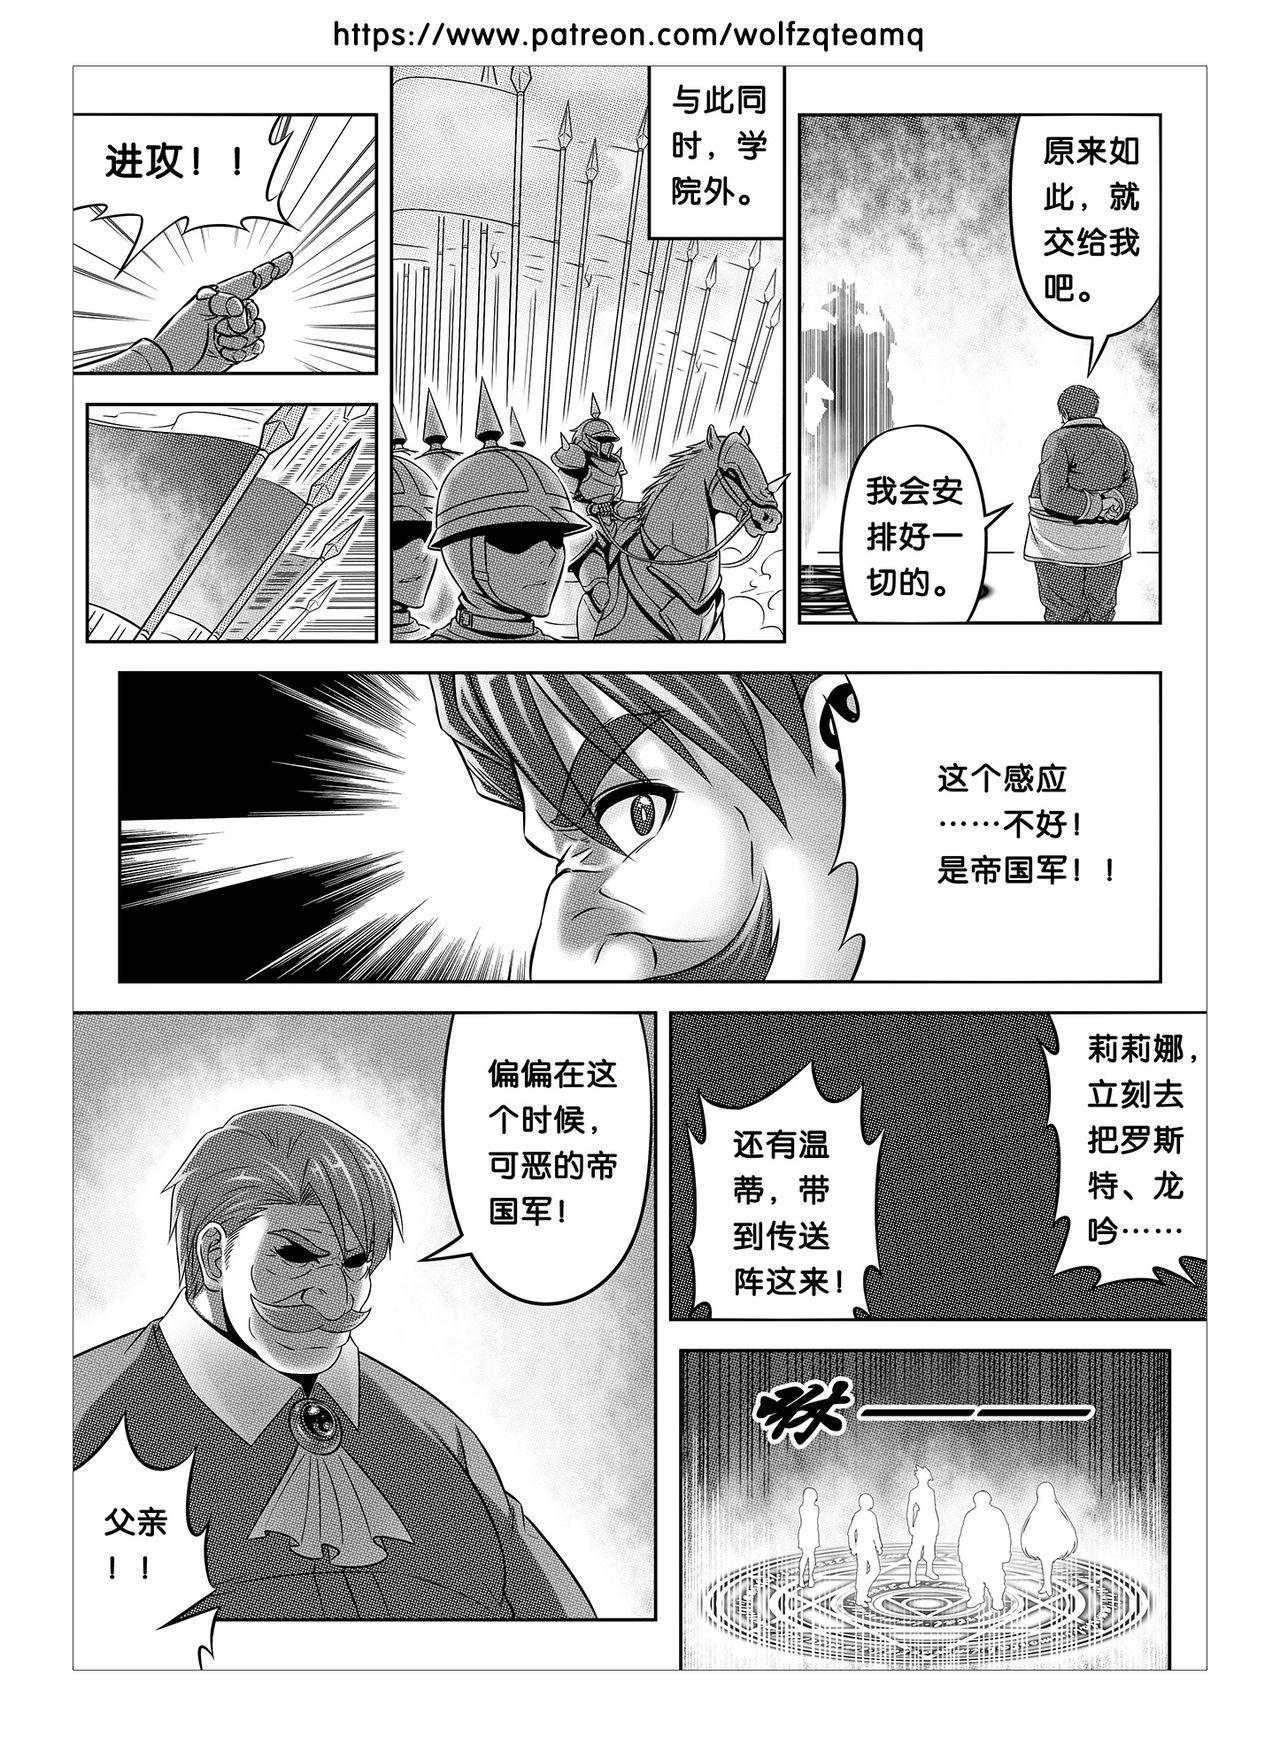 Audition Bad End Of Cursed Armor College Line（诅咒铠甲学院线）Chinese Hard Core Sex - Page 5